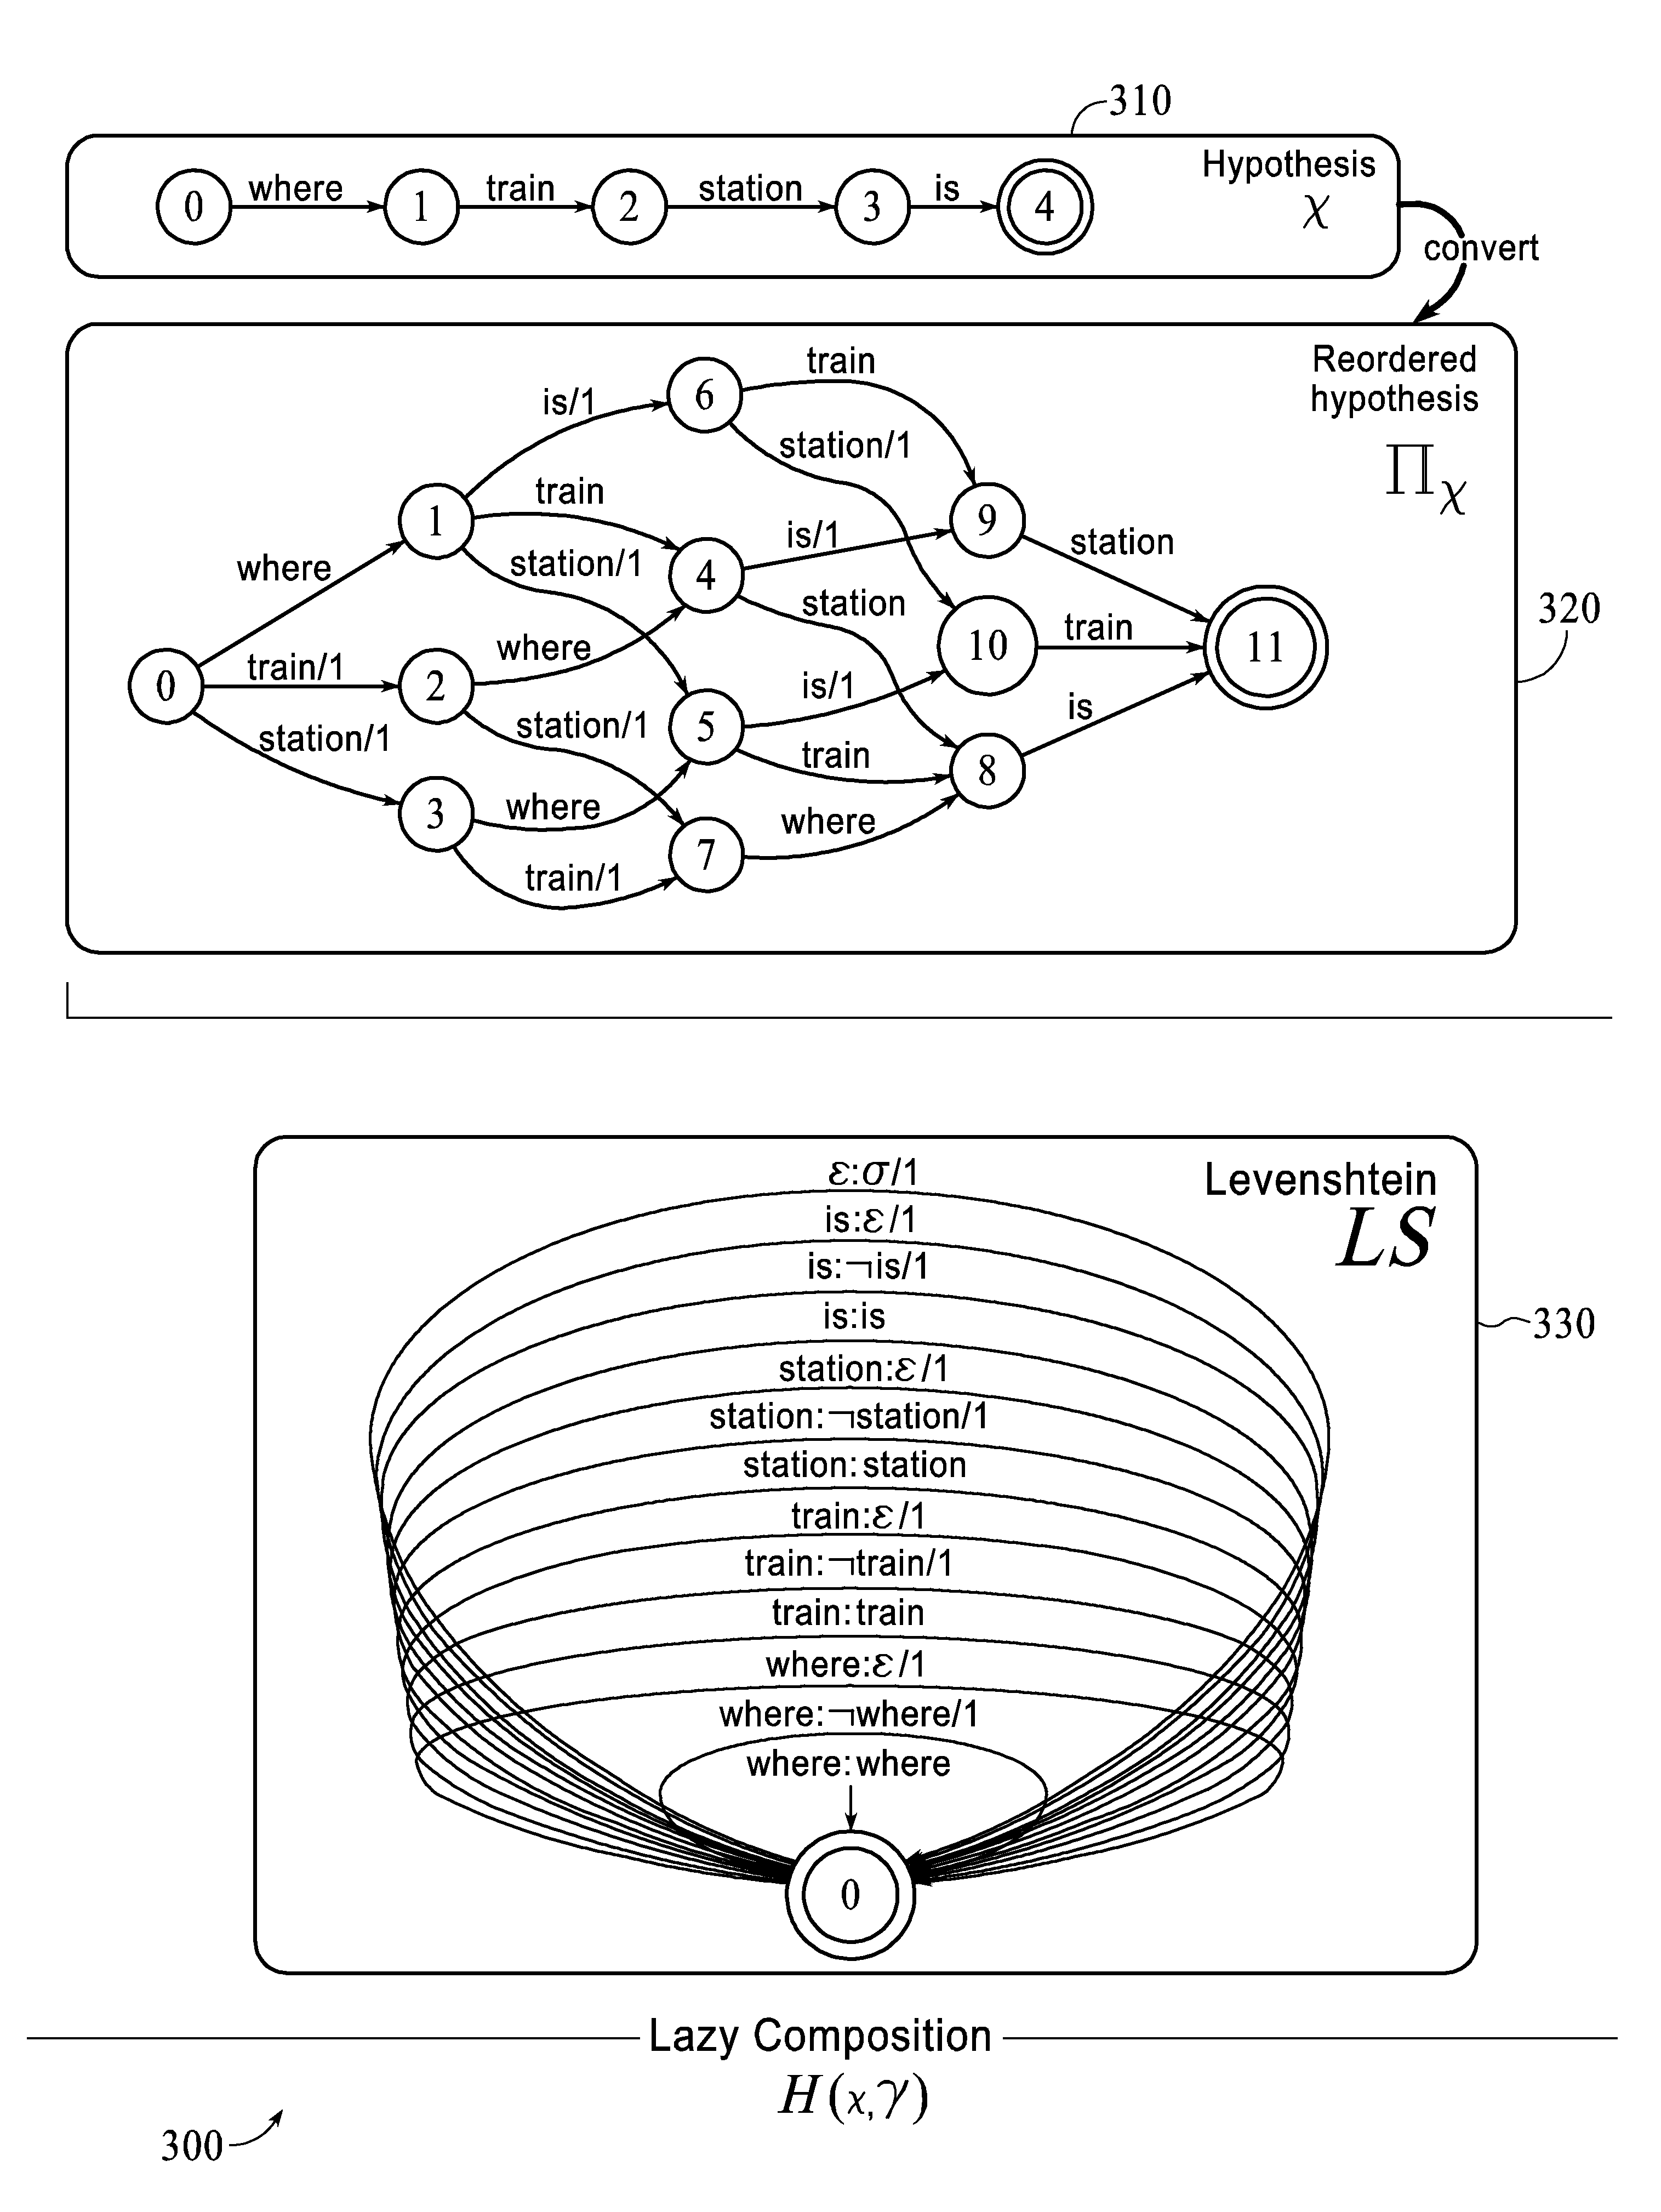 Method and System for Automatic Management of Reputation of Translators